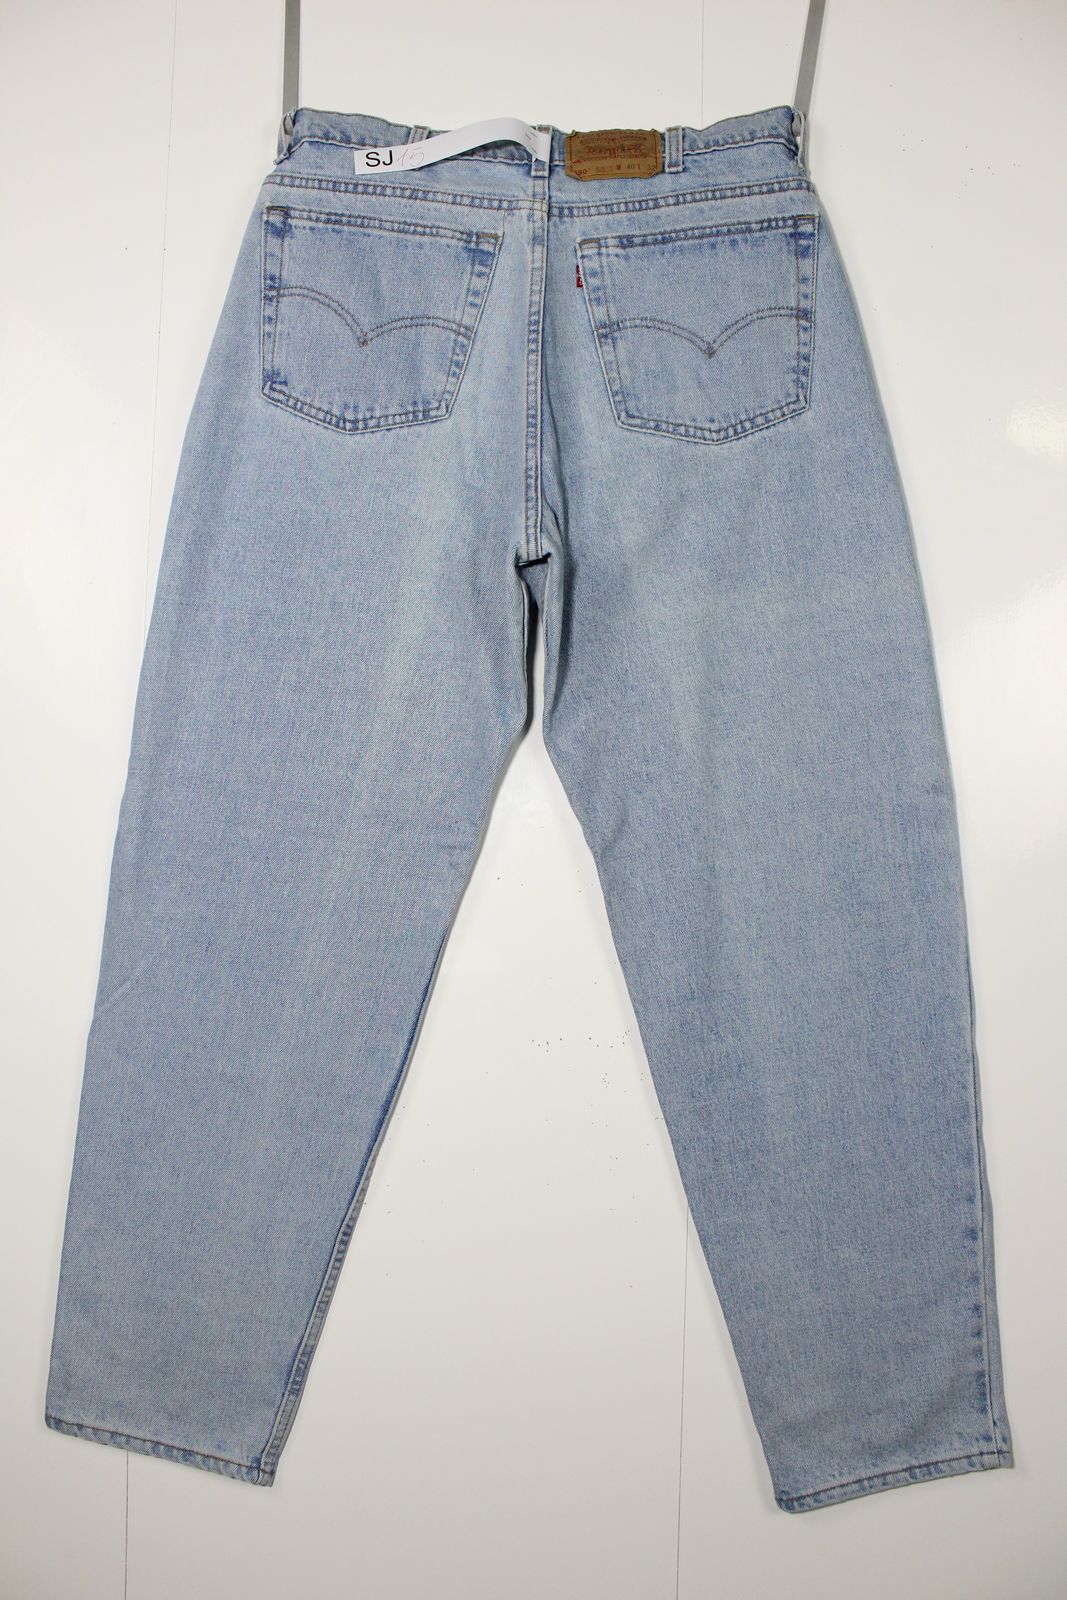 Levi's 550 Relaxed Fit Denim Made In USA W40 L32 Vintage